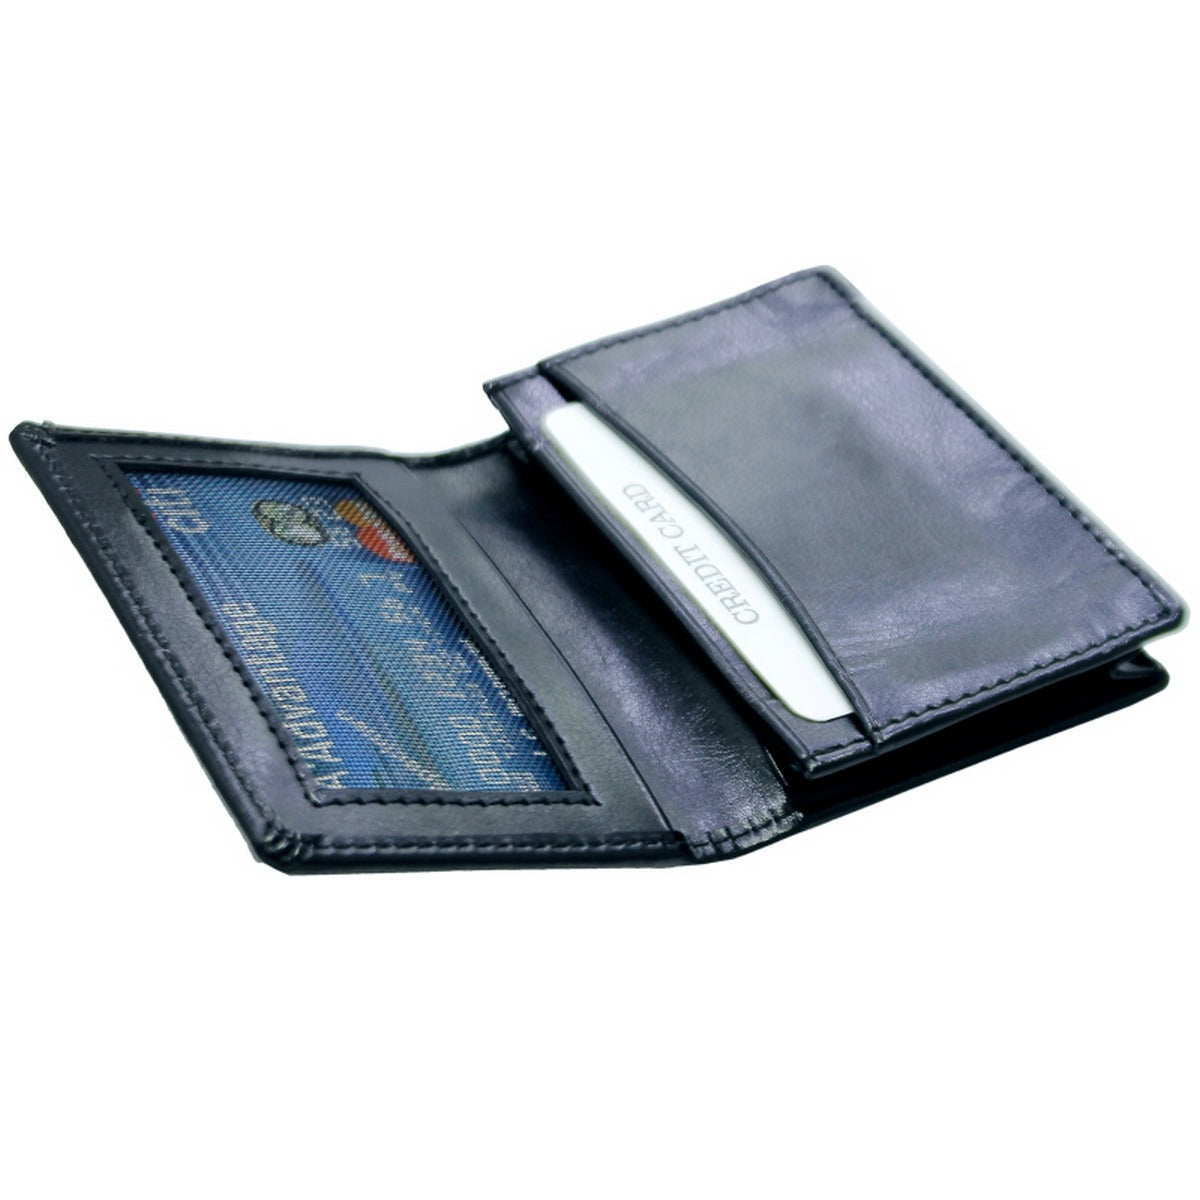 Black Business Card Holder cum Wallet - For Corporate Gifting, Event Gifting, Freebies, Promotions JACC01BK